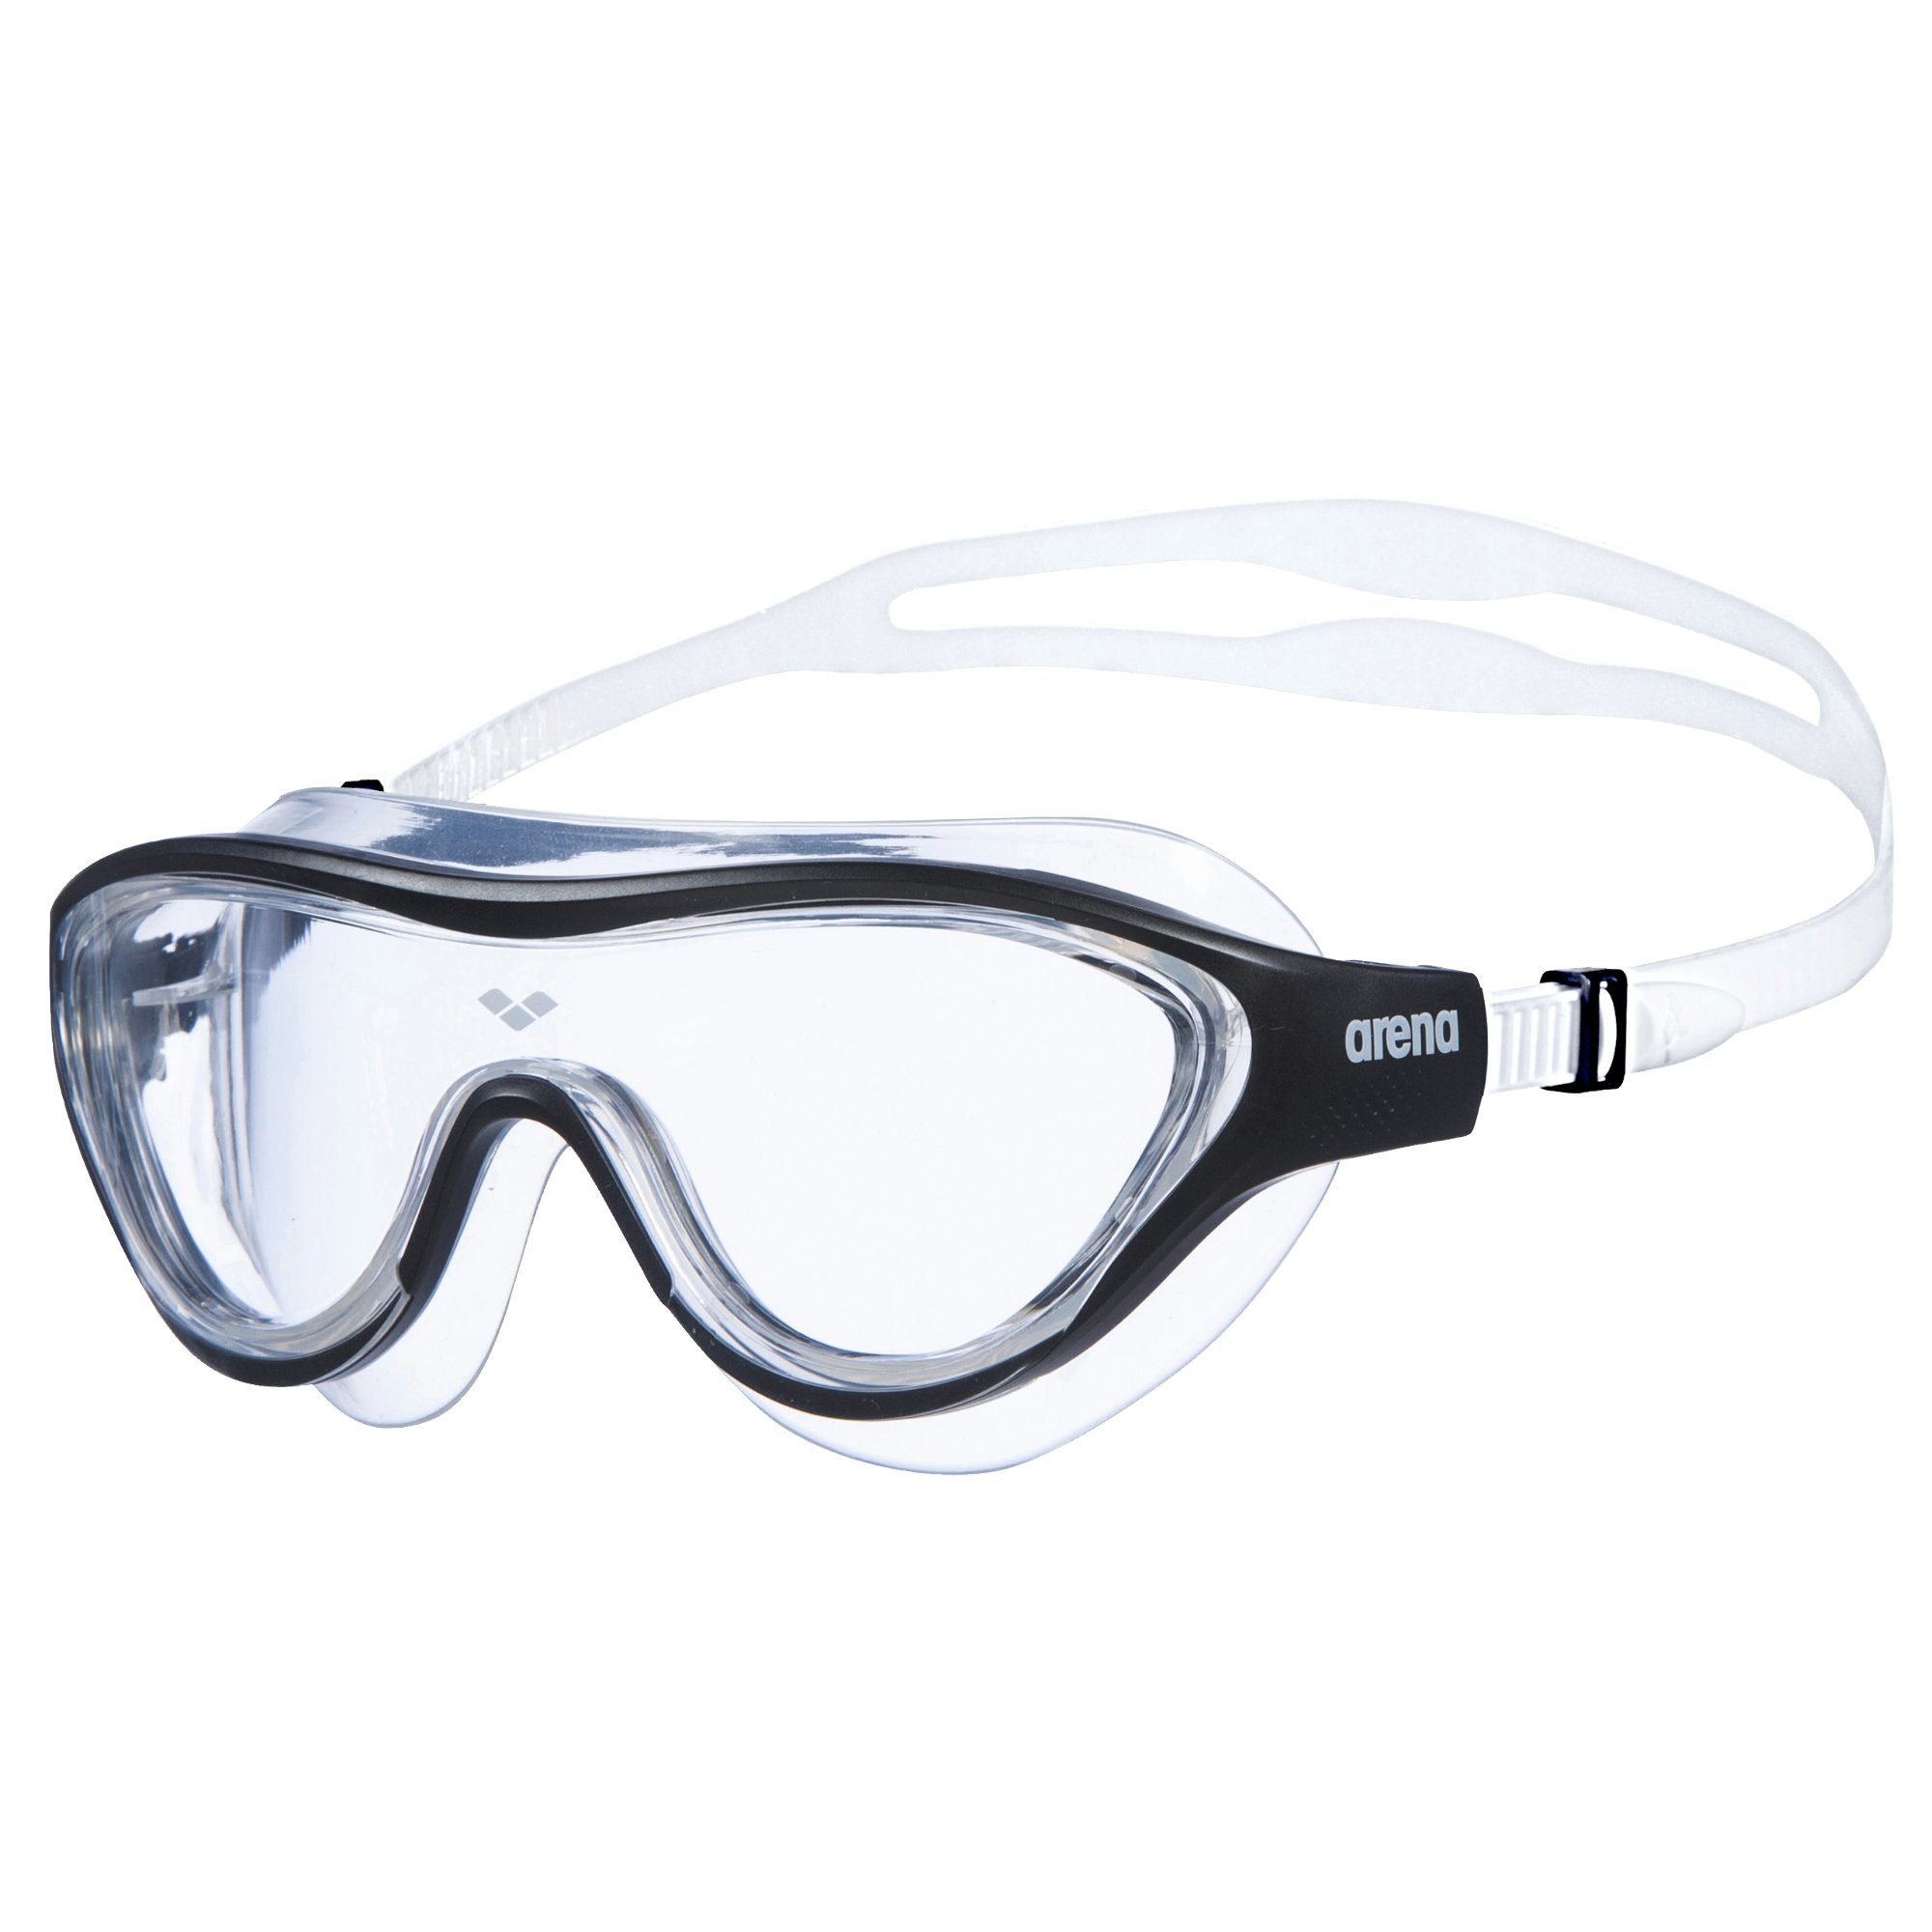 The clear-black-transparant Arena arena Schwimmbrille Mask One